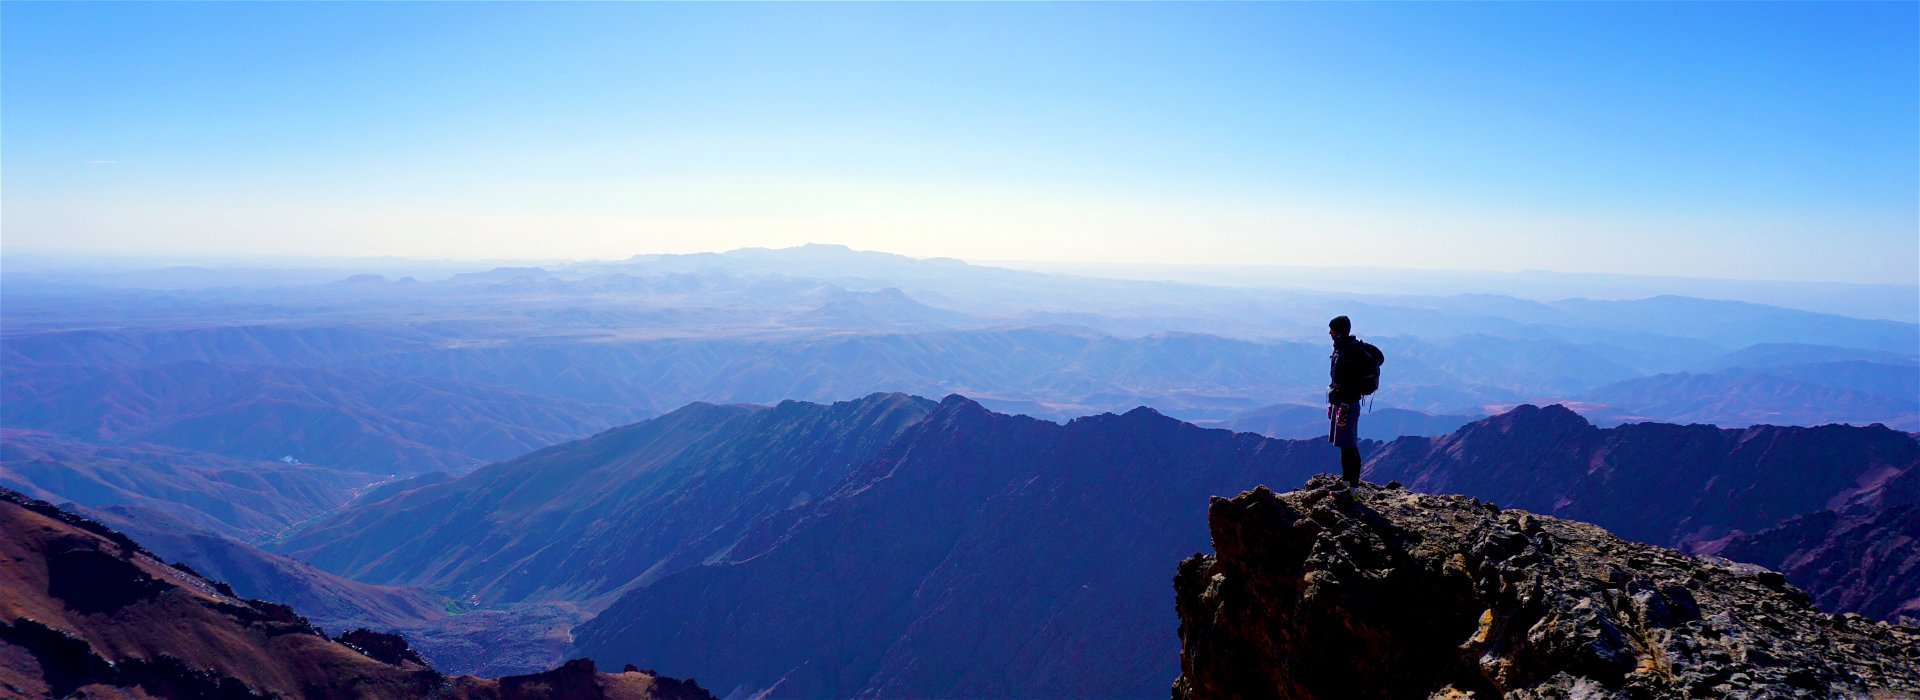 Toubkal is just the cherry on the cake!